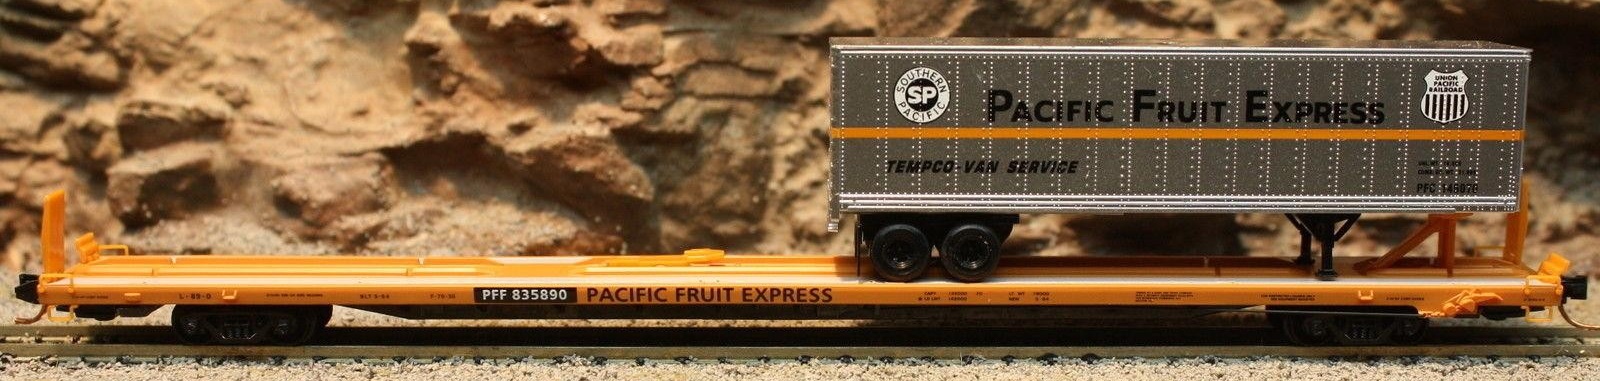 N Scale - Micro-Trains - 071 51 100 - Flatcar, 89 Foot, TOFC - Pacific Fruit Express - 835888